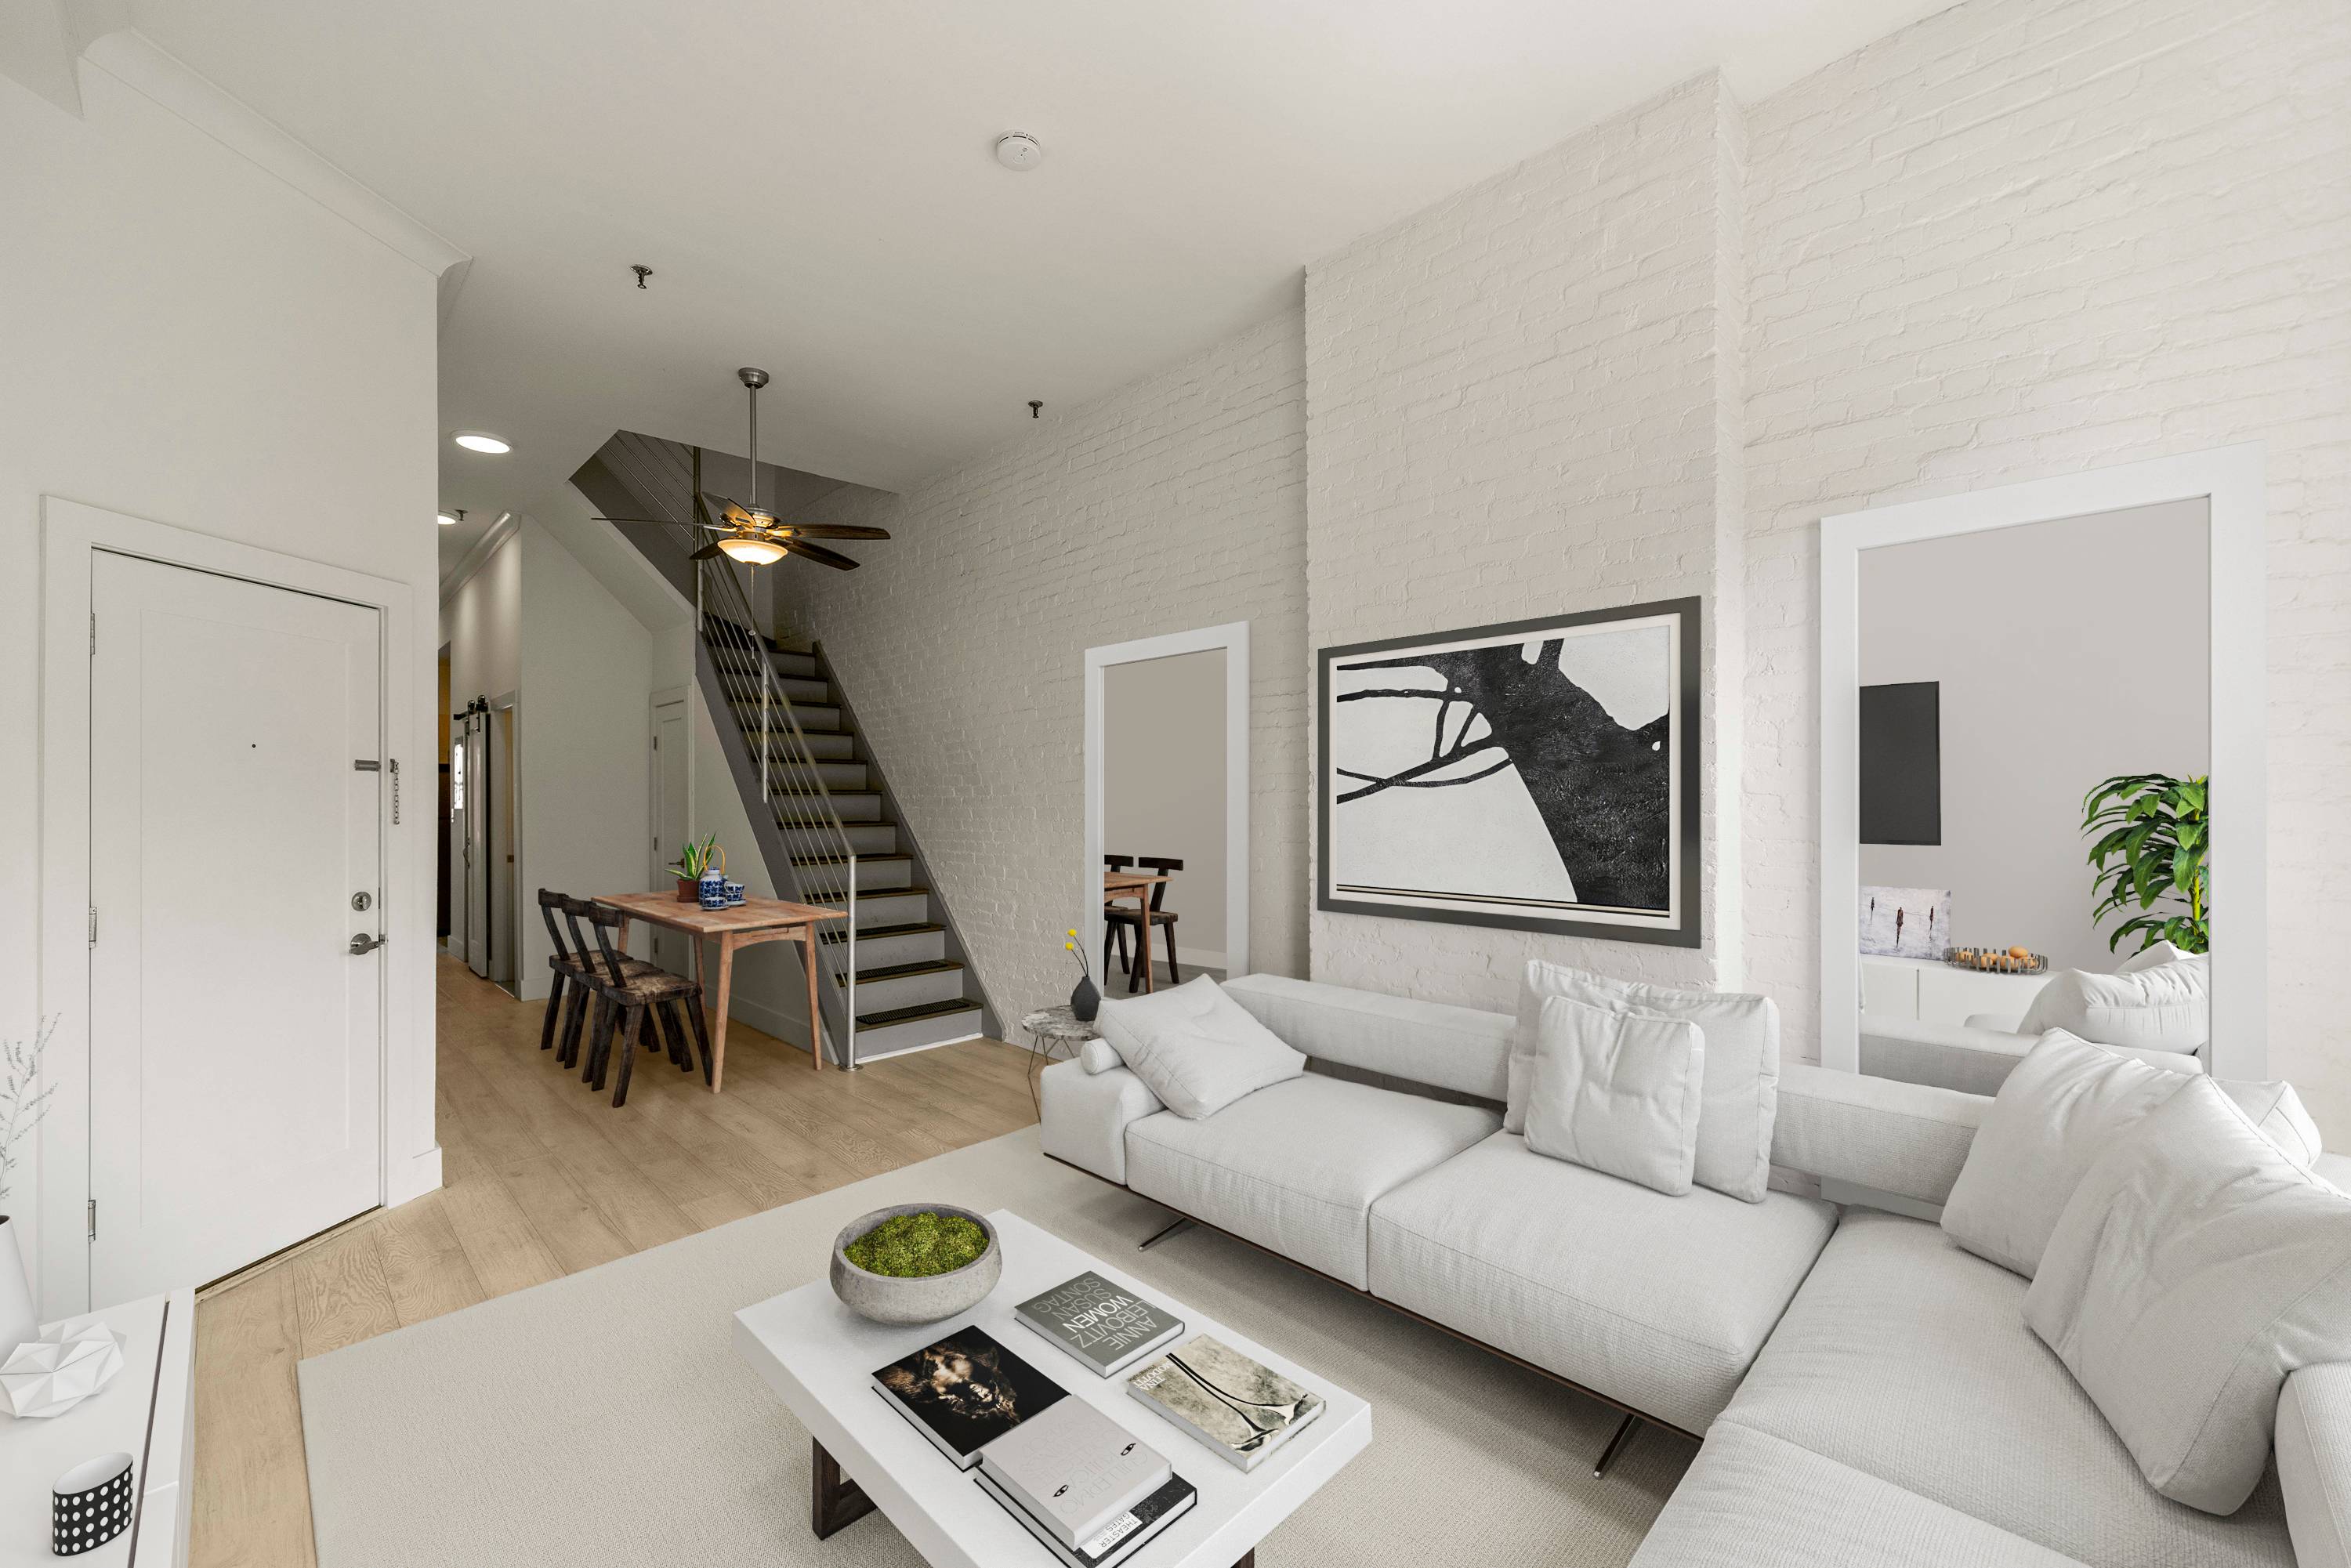 3 Bedroom 1.5 Baths! Beautiful Open 2 Story Duplex Apartment in Hoboken NJ with Outdoor Space. South and North Facing Apartment. Butterfly MX Virtual Doorman system on site!